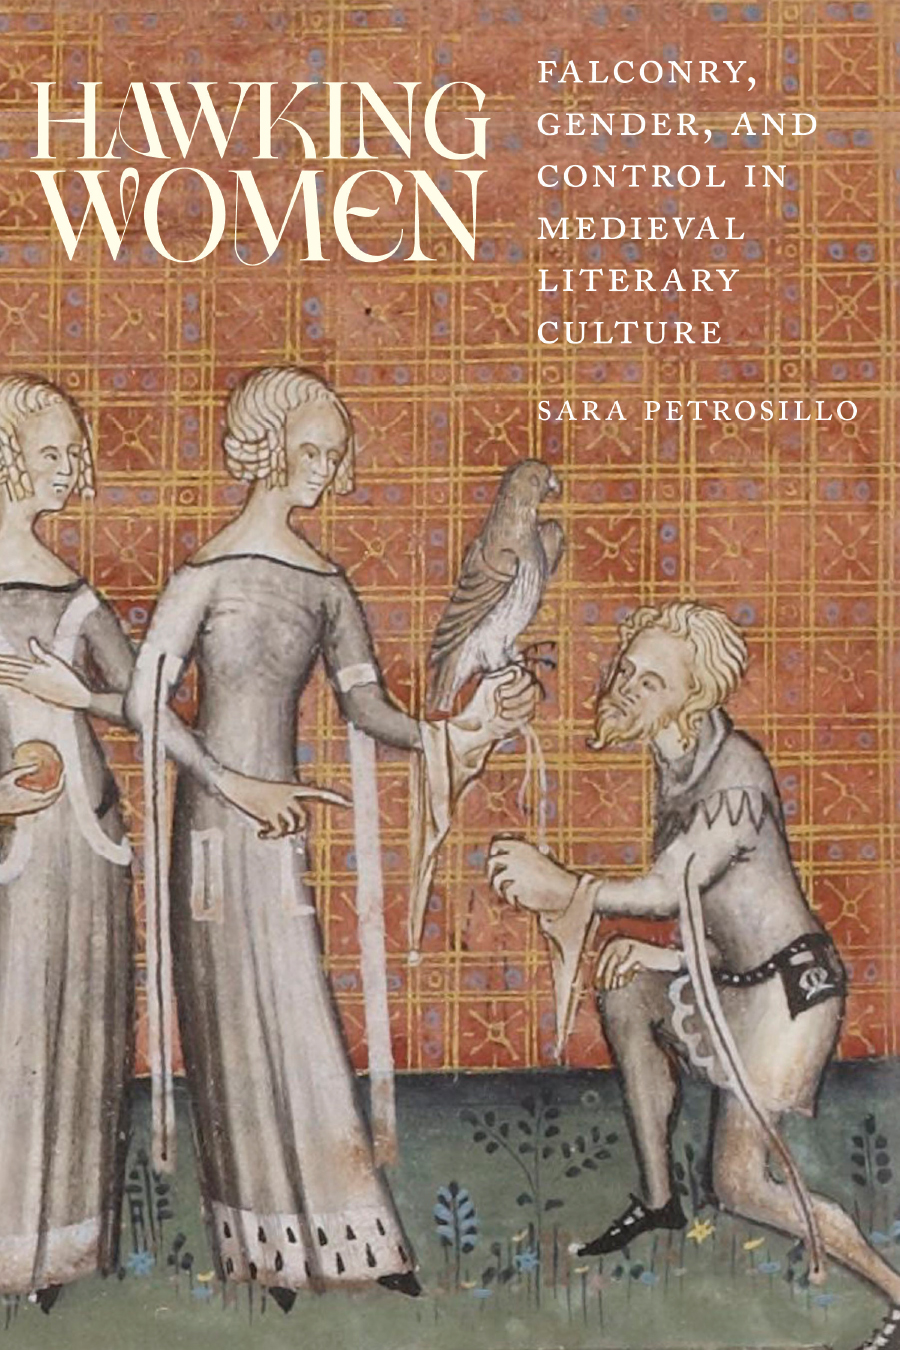 Hawking Women: Falconry, Gender, and Control in Medieval Literary Culture cover